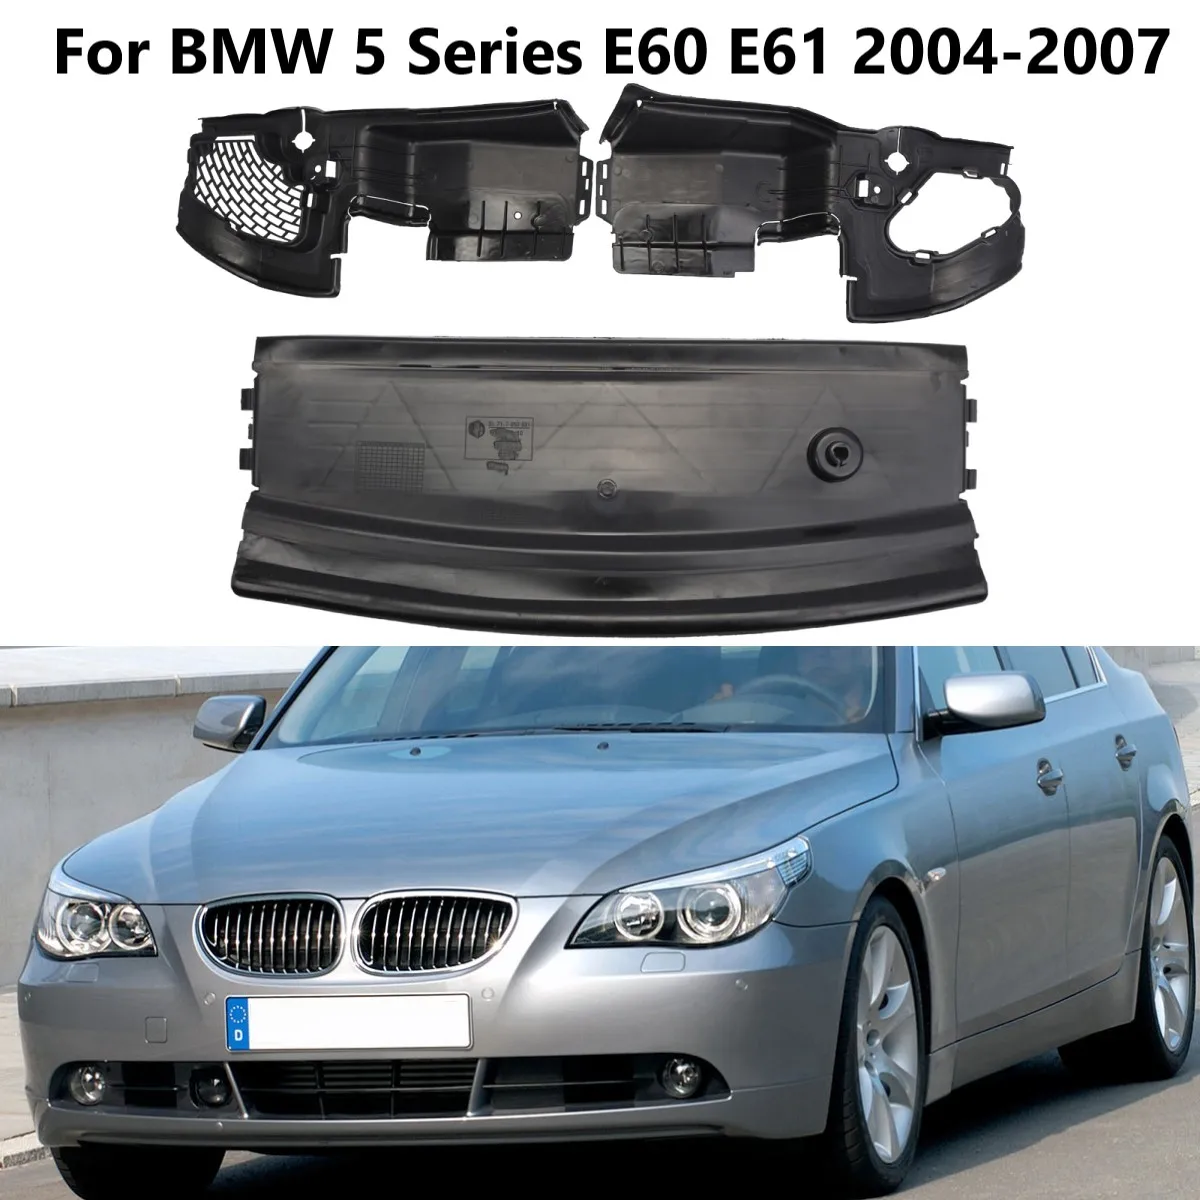 

For BMW E60 E61 525i 525xi 2004-2007 New Splash Shield Lower Duct Guard Repair Part Replace 51717050651 51717050649 51717050604